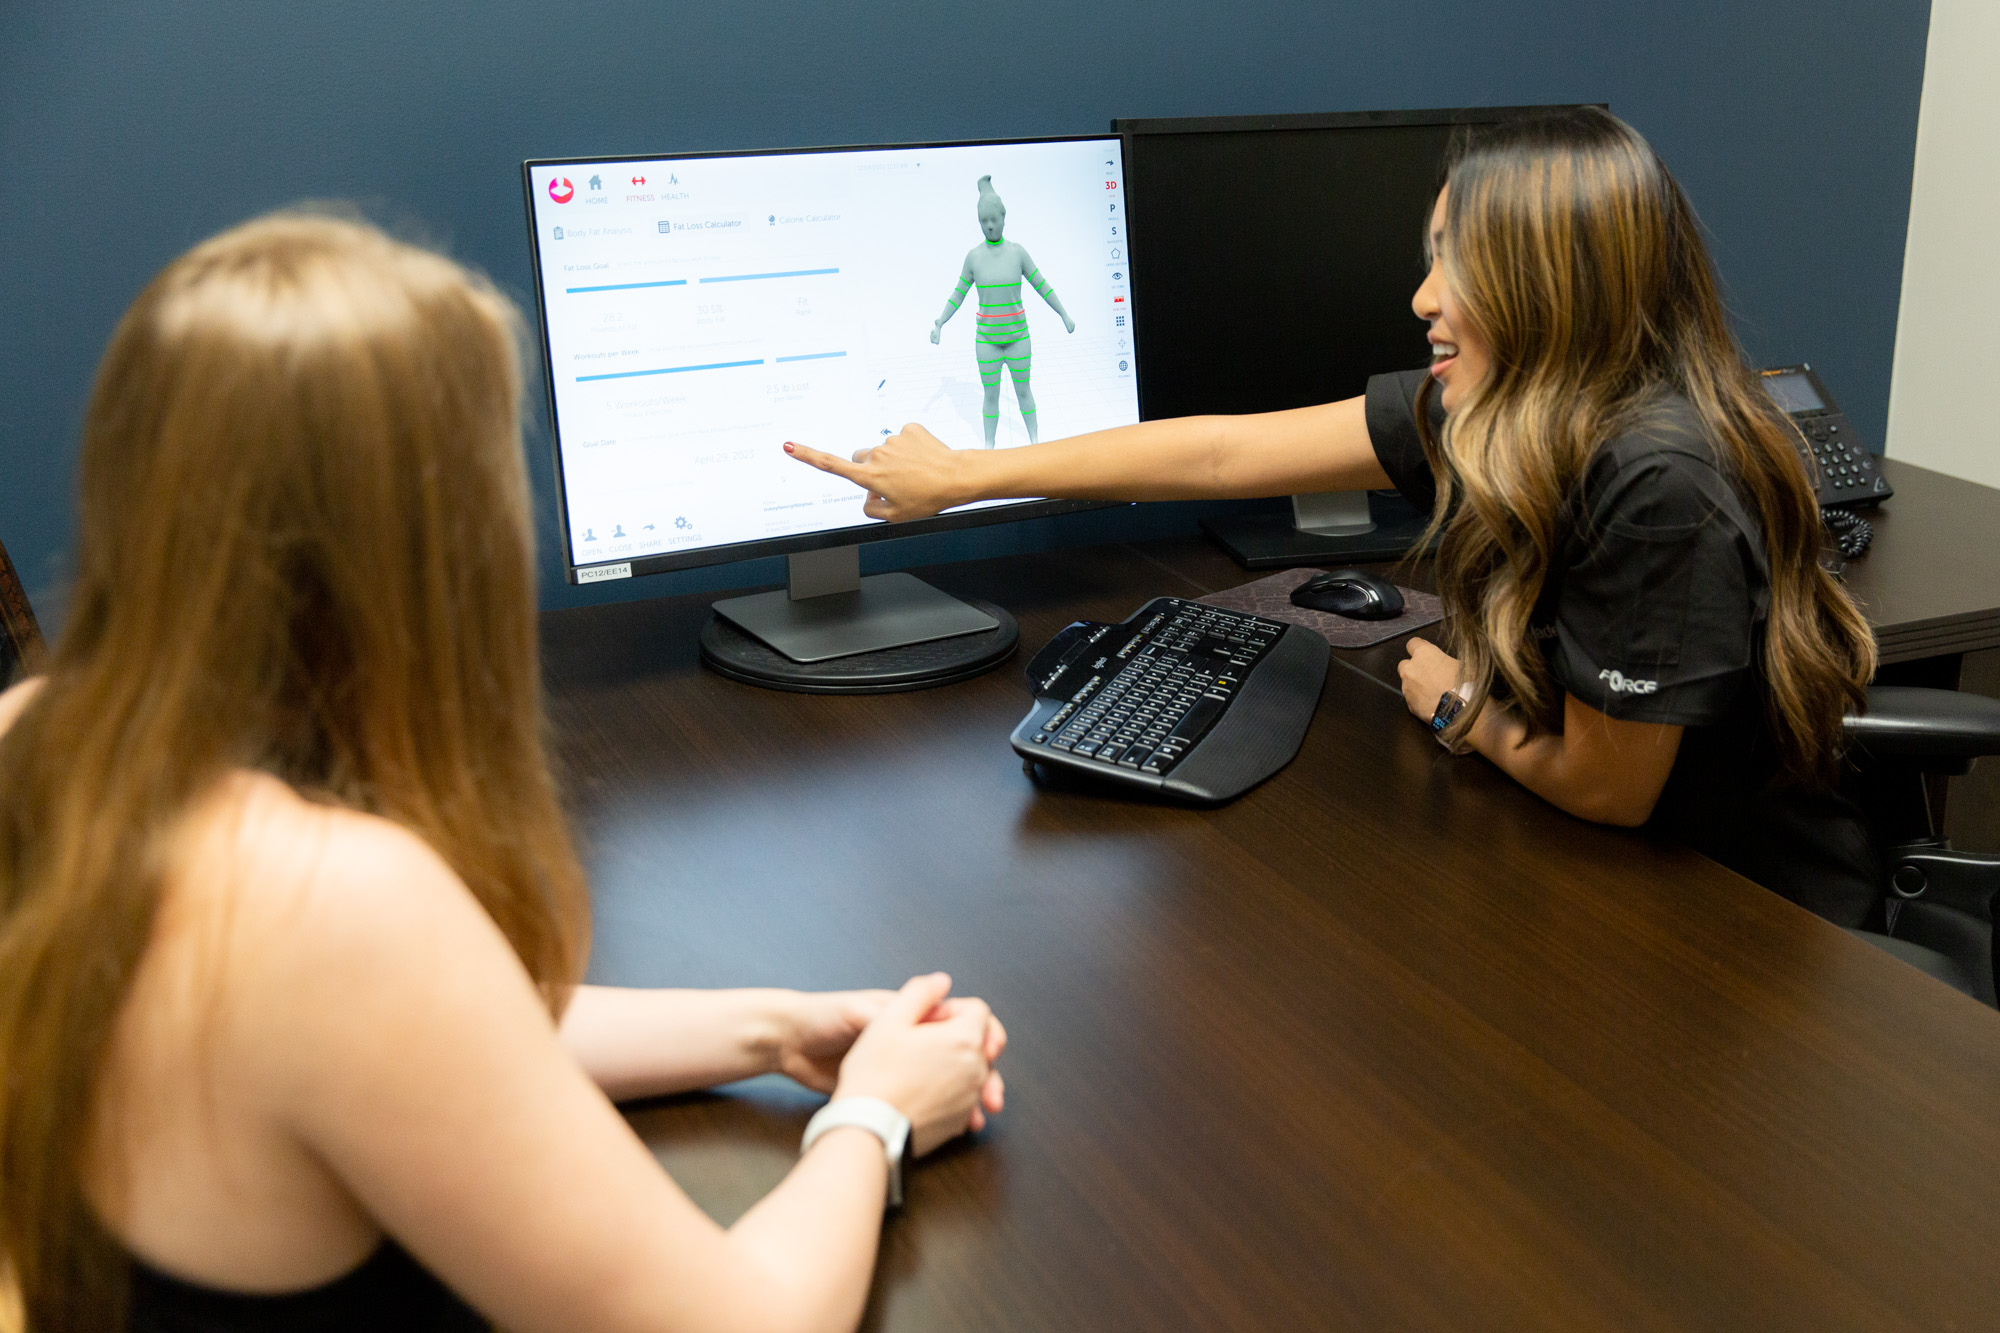 Marcos Medical provider points at a computer screen with a description of the Ideal Protein Plan. The screen also shows an image of a body. A female client follows along from the other side of the desk.